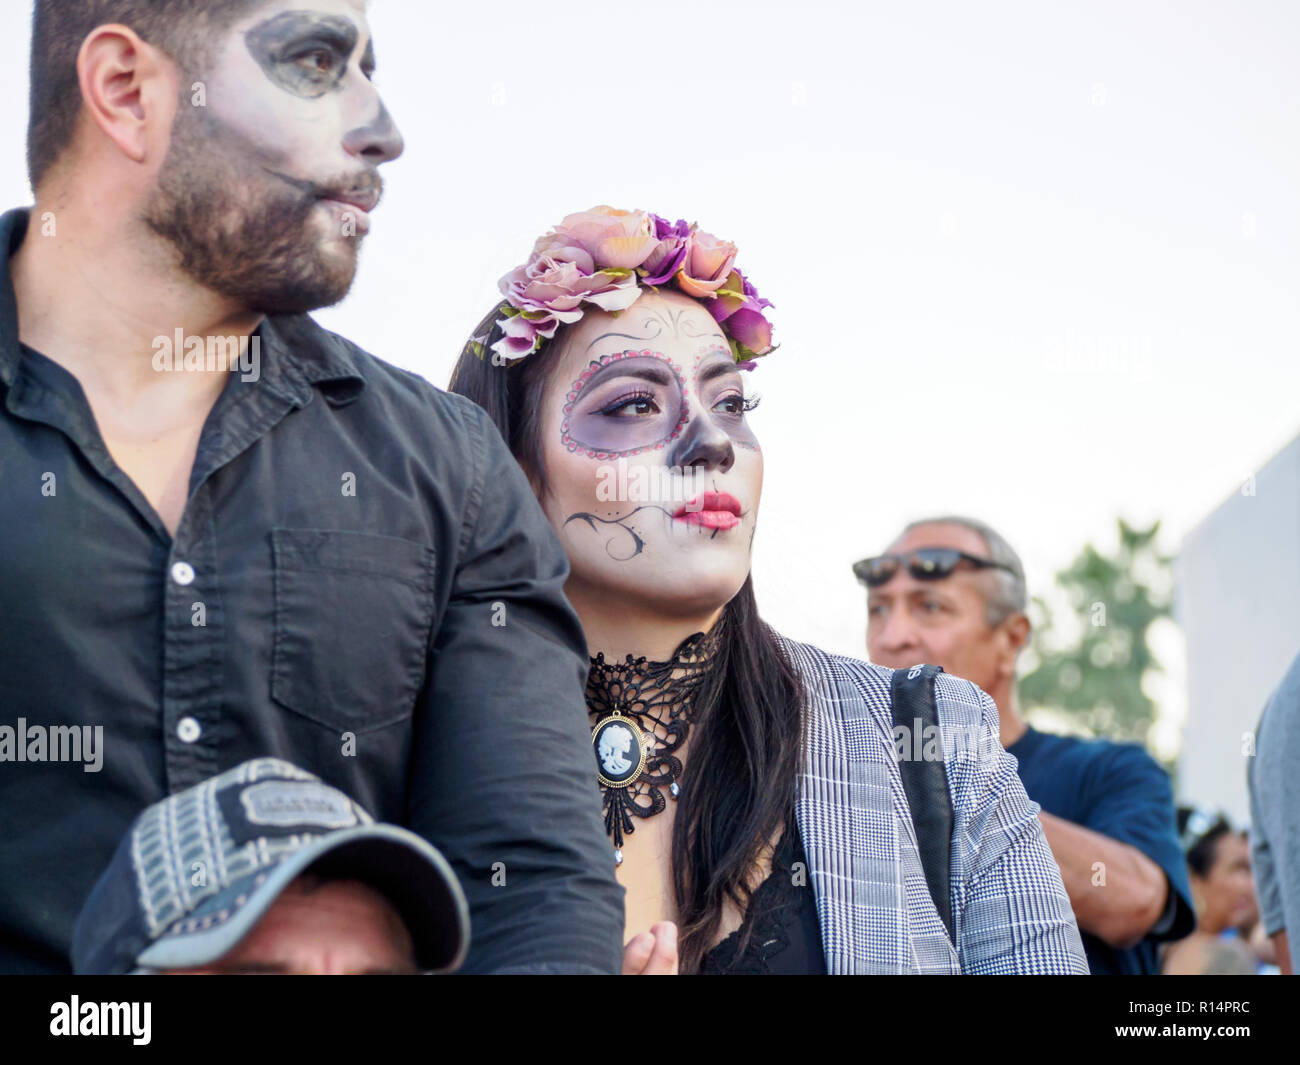 A man and woman in face paint at the 2018 Dia De Los Muertos Celebration In Corpus Christi, Texas USA. Stock Photo